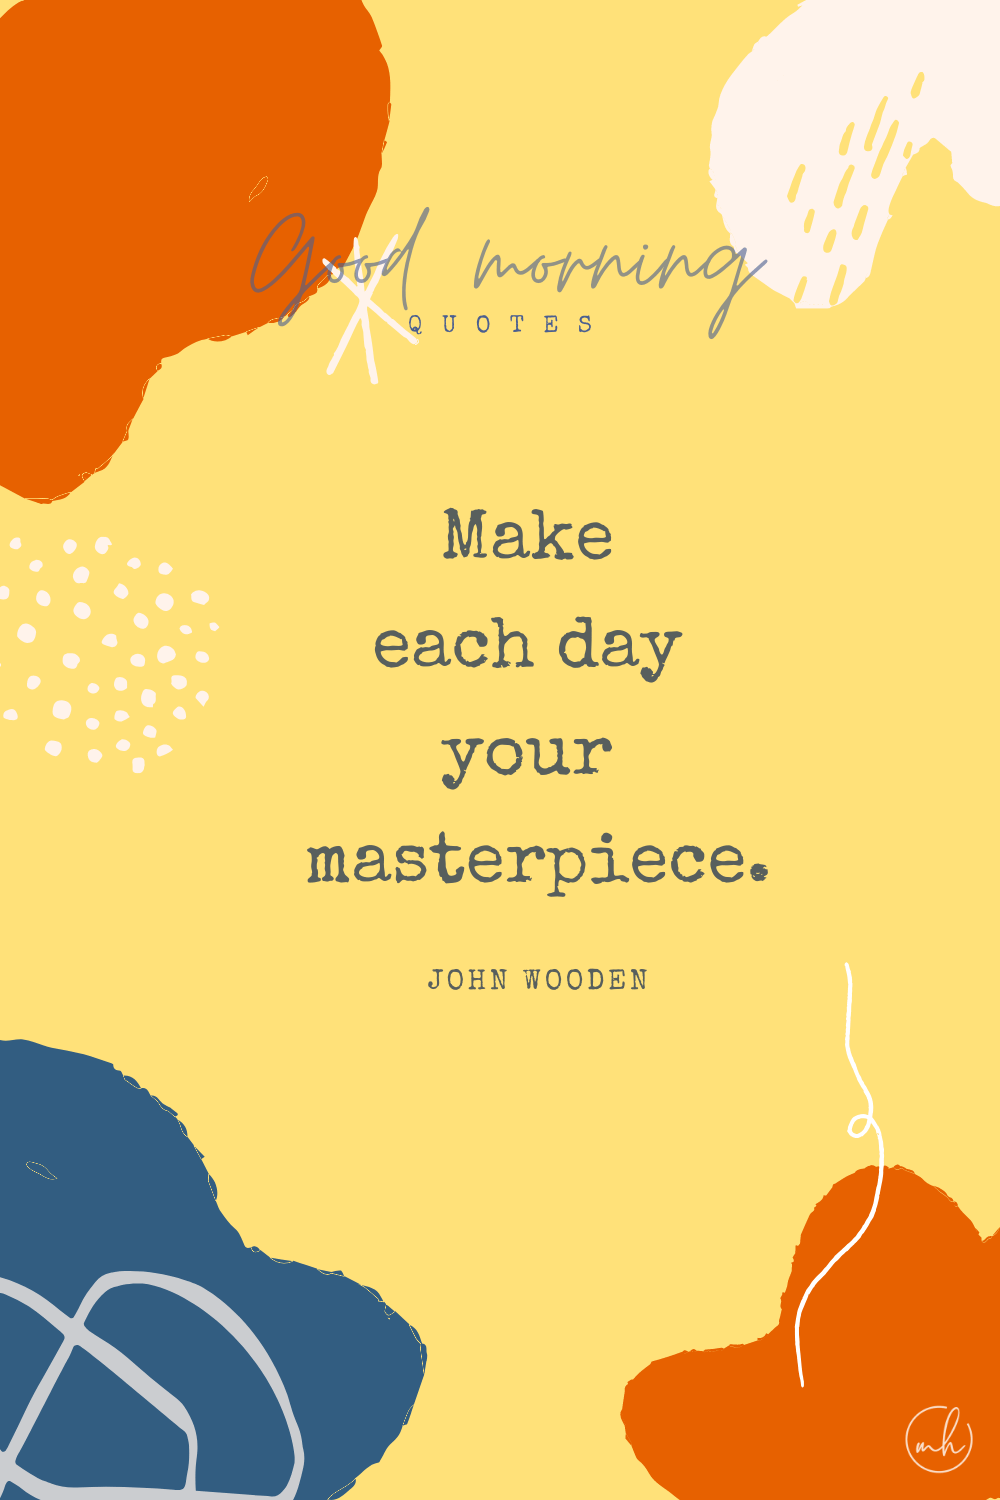 "Make each day your masterpiece." – John Wooden